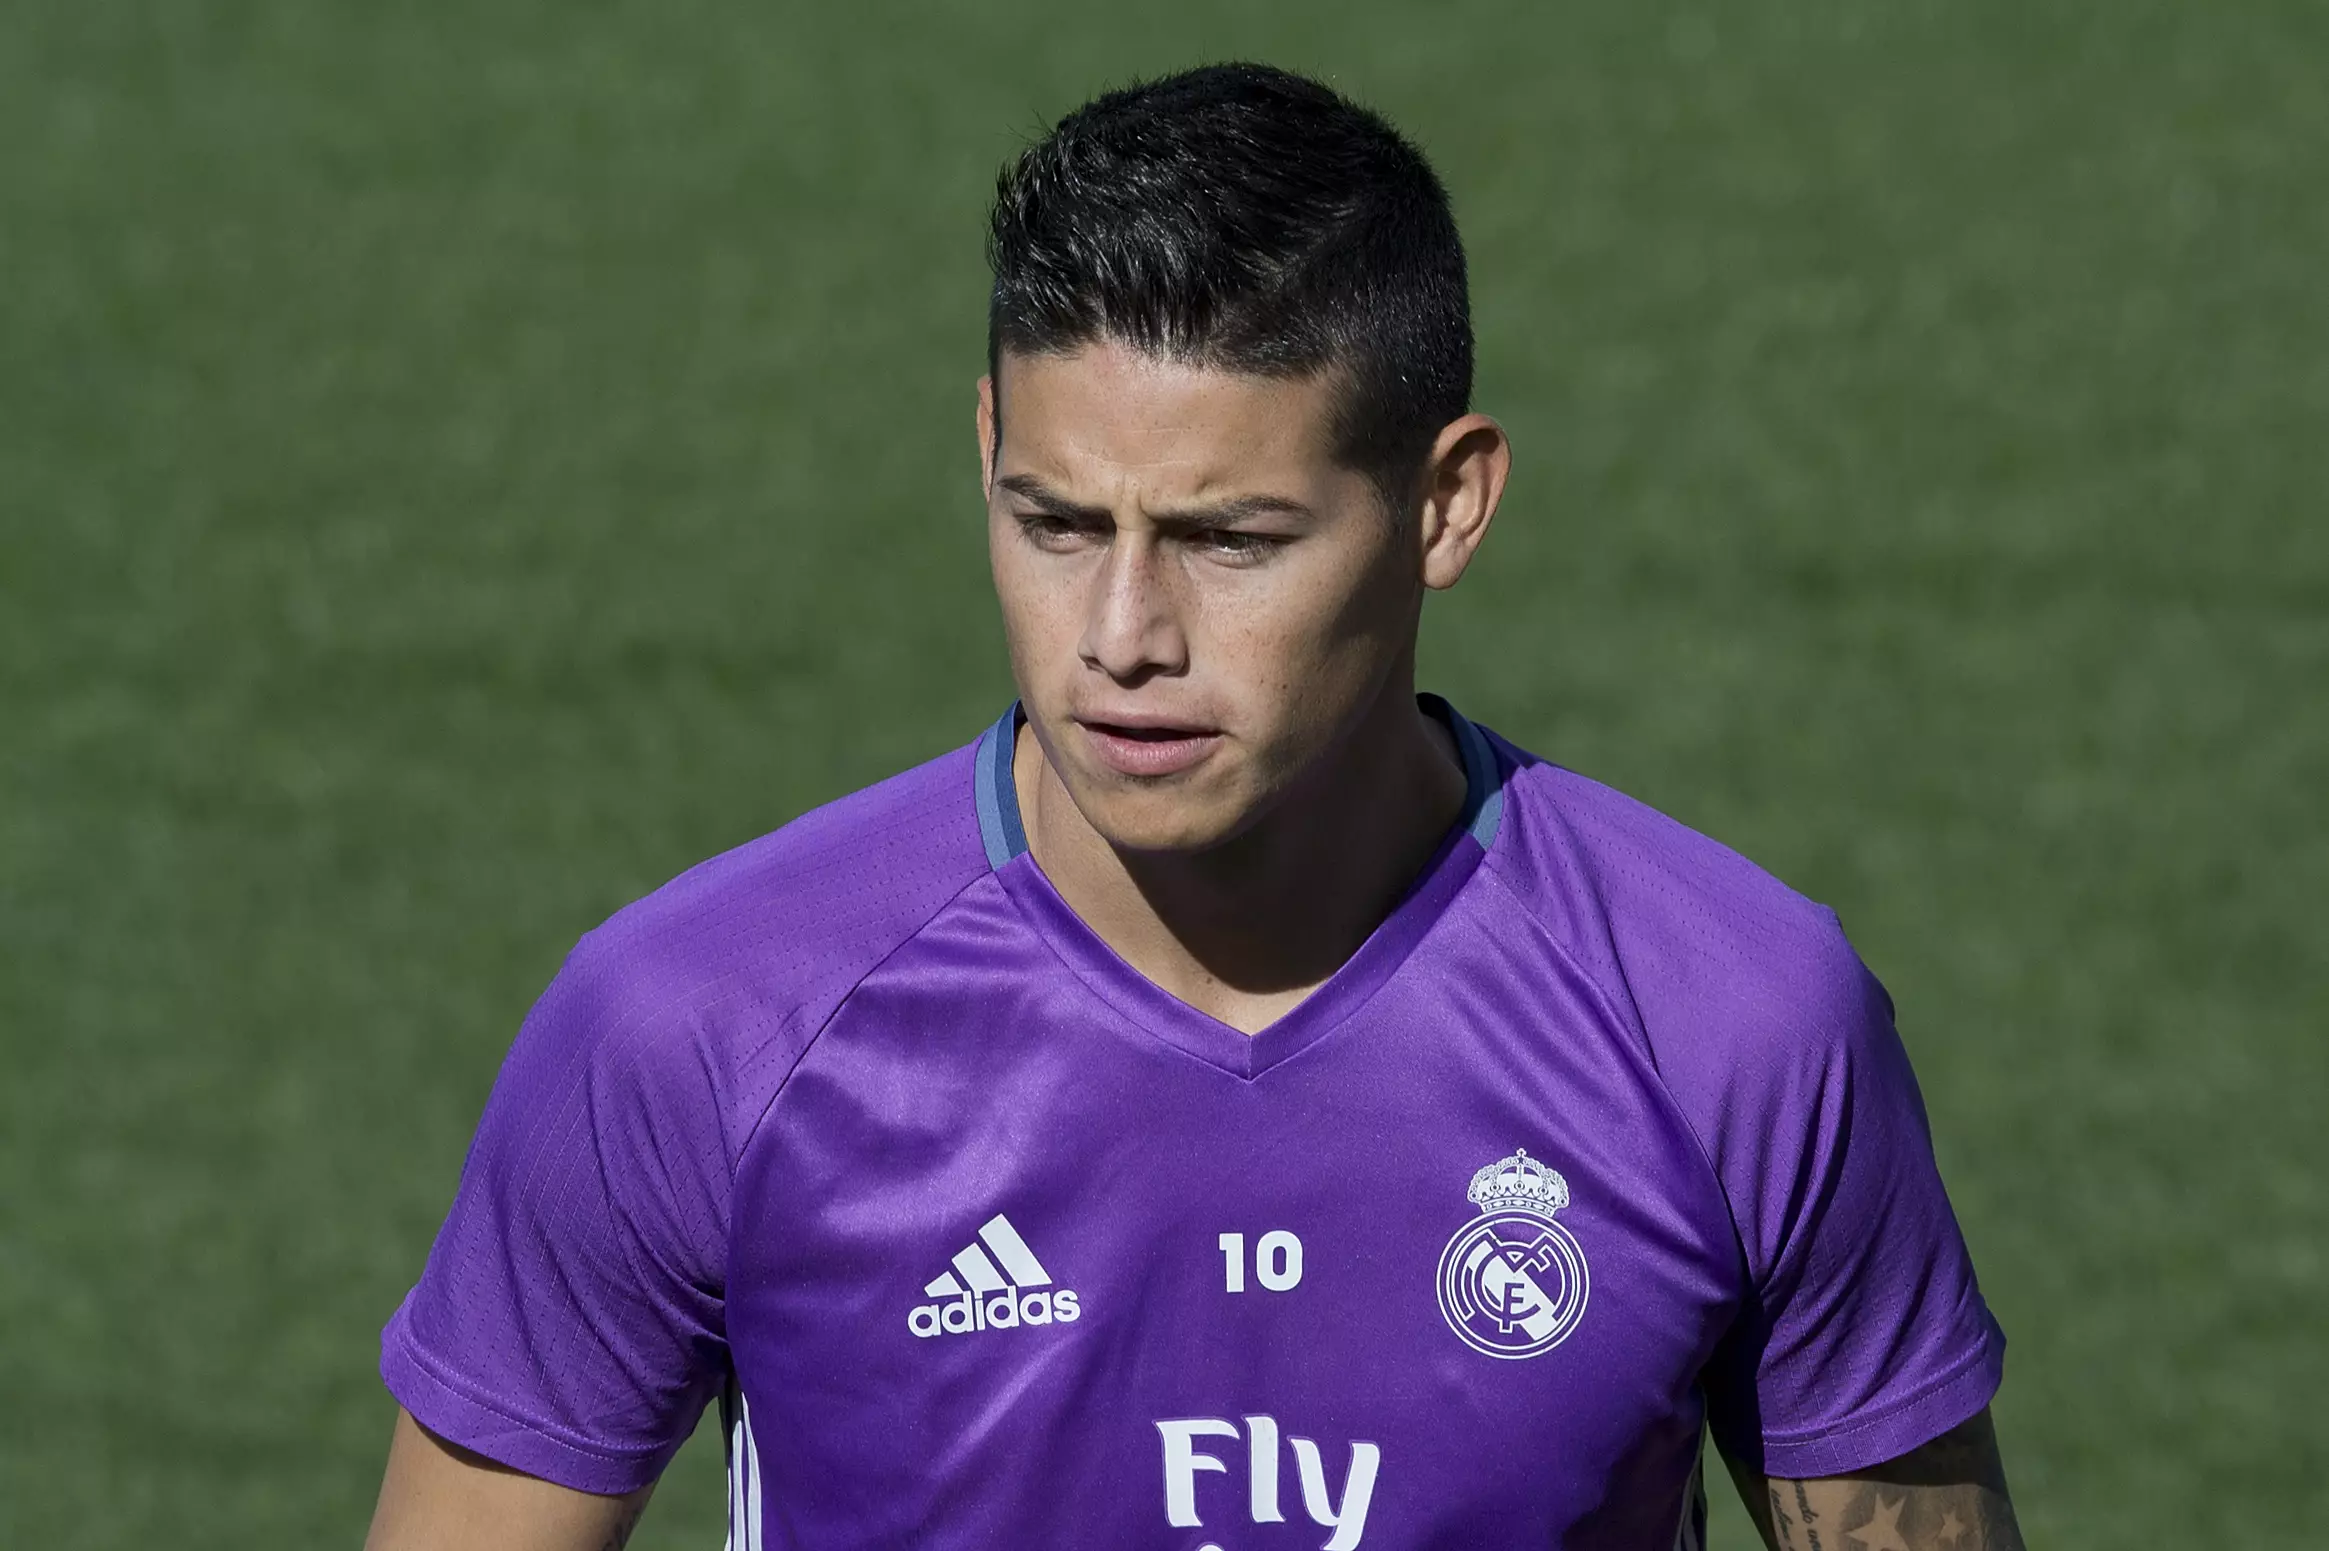 The James Rodriguez Transfer Saga Is Officially Over